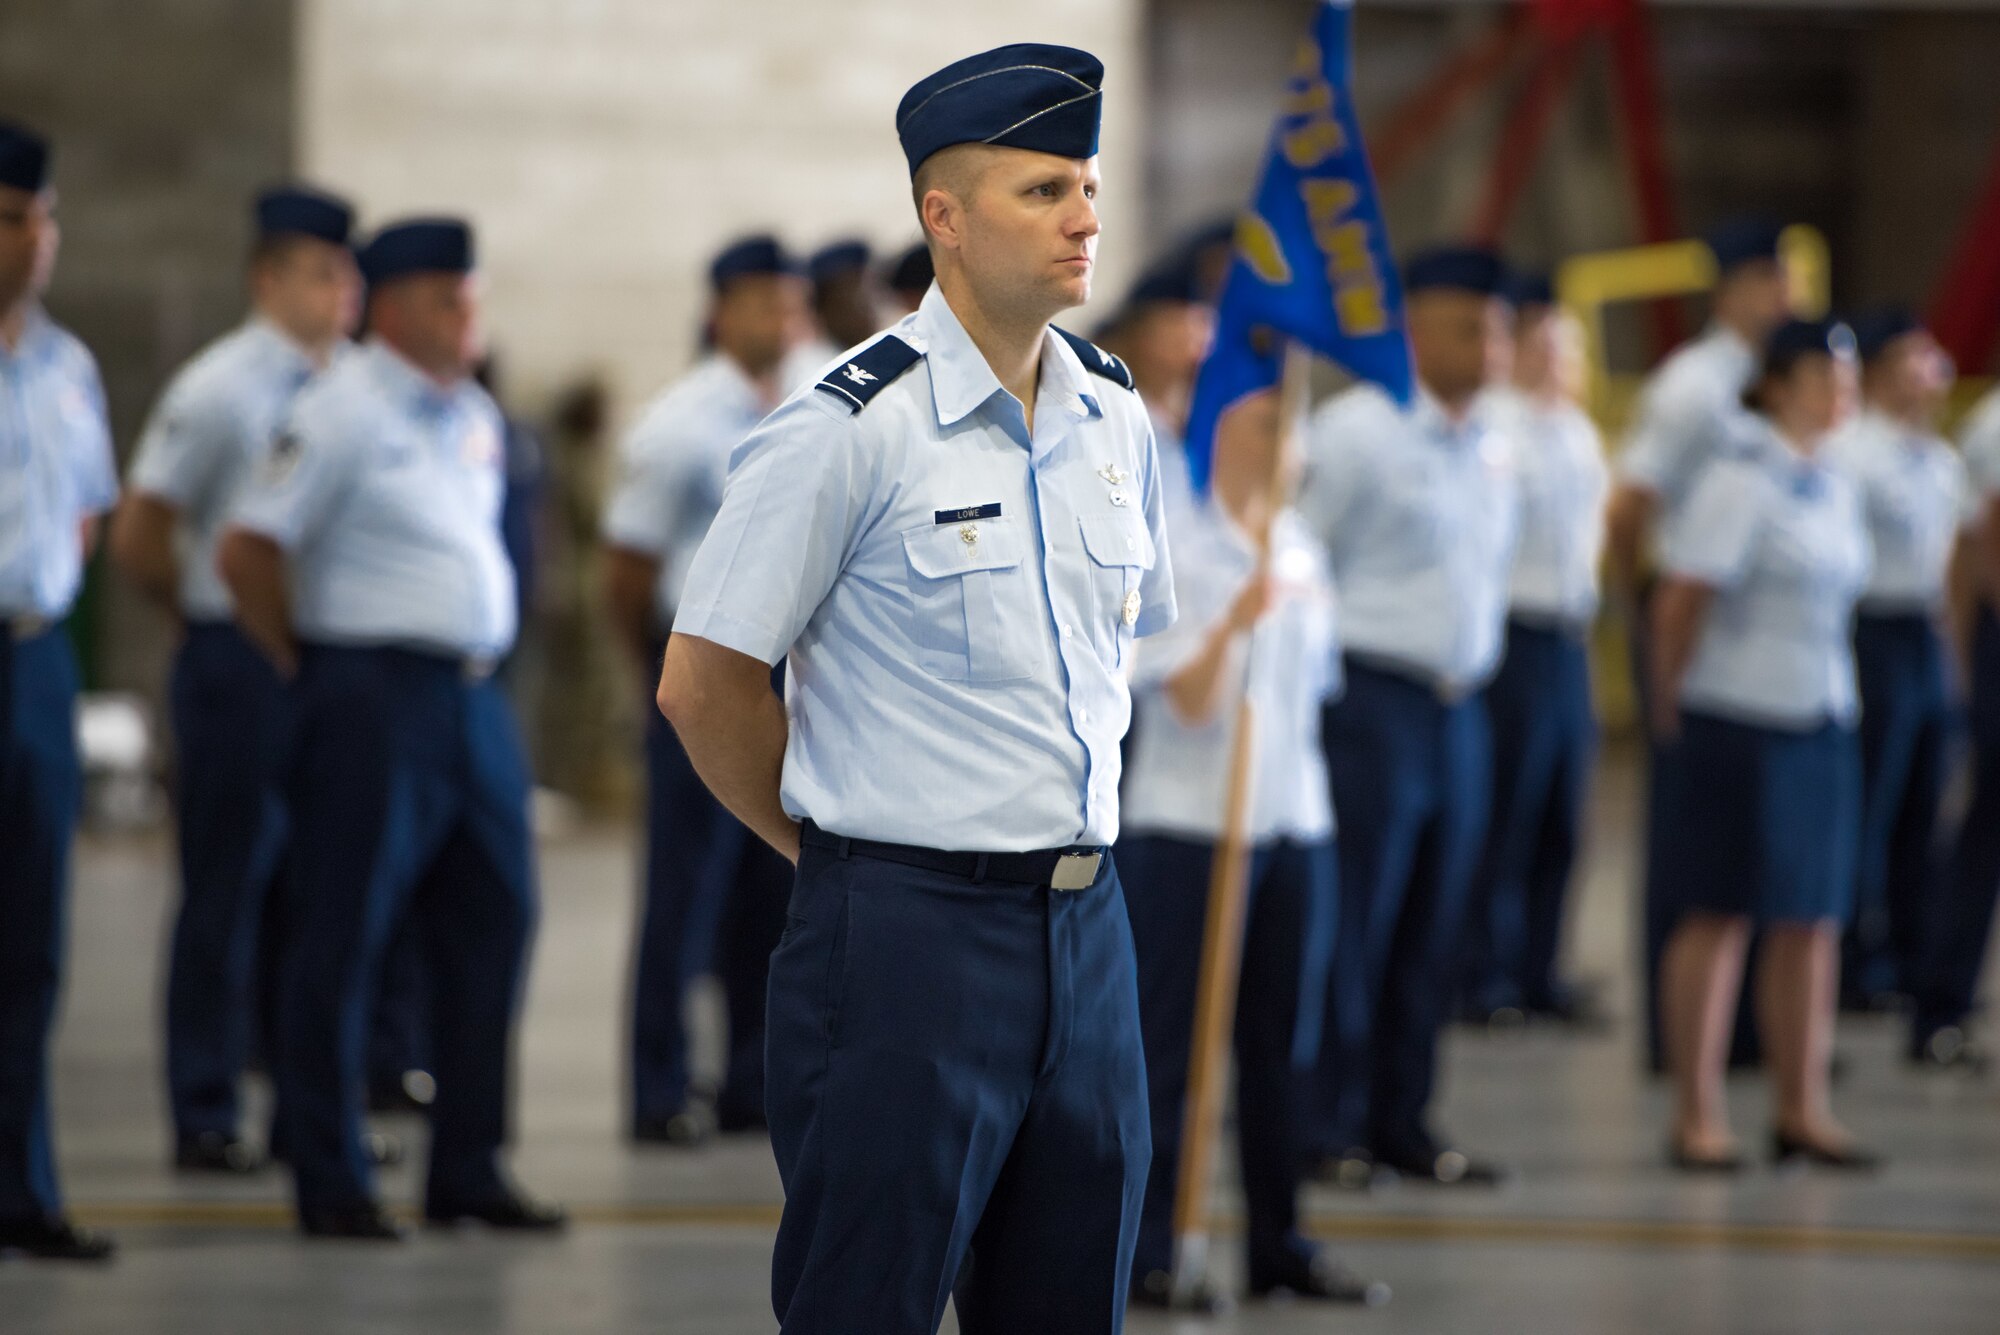 U.S. Air Force Col. Rob Lowe, 375th Air Mobility Wing vice commander, leads a formation at the 375th AMW change of command on Scott Air Force Base, Illinois, July 1, 2021. The change of command ceremony represents a time-honored military tradition providing an opportunity for Airmen to witness the transfer of power to their newly appointed commanding officer.(U.S. Air Force photo by Airman 1st Class Mark Sulaica)